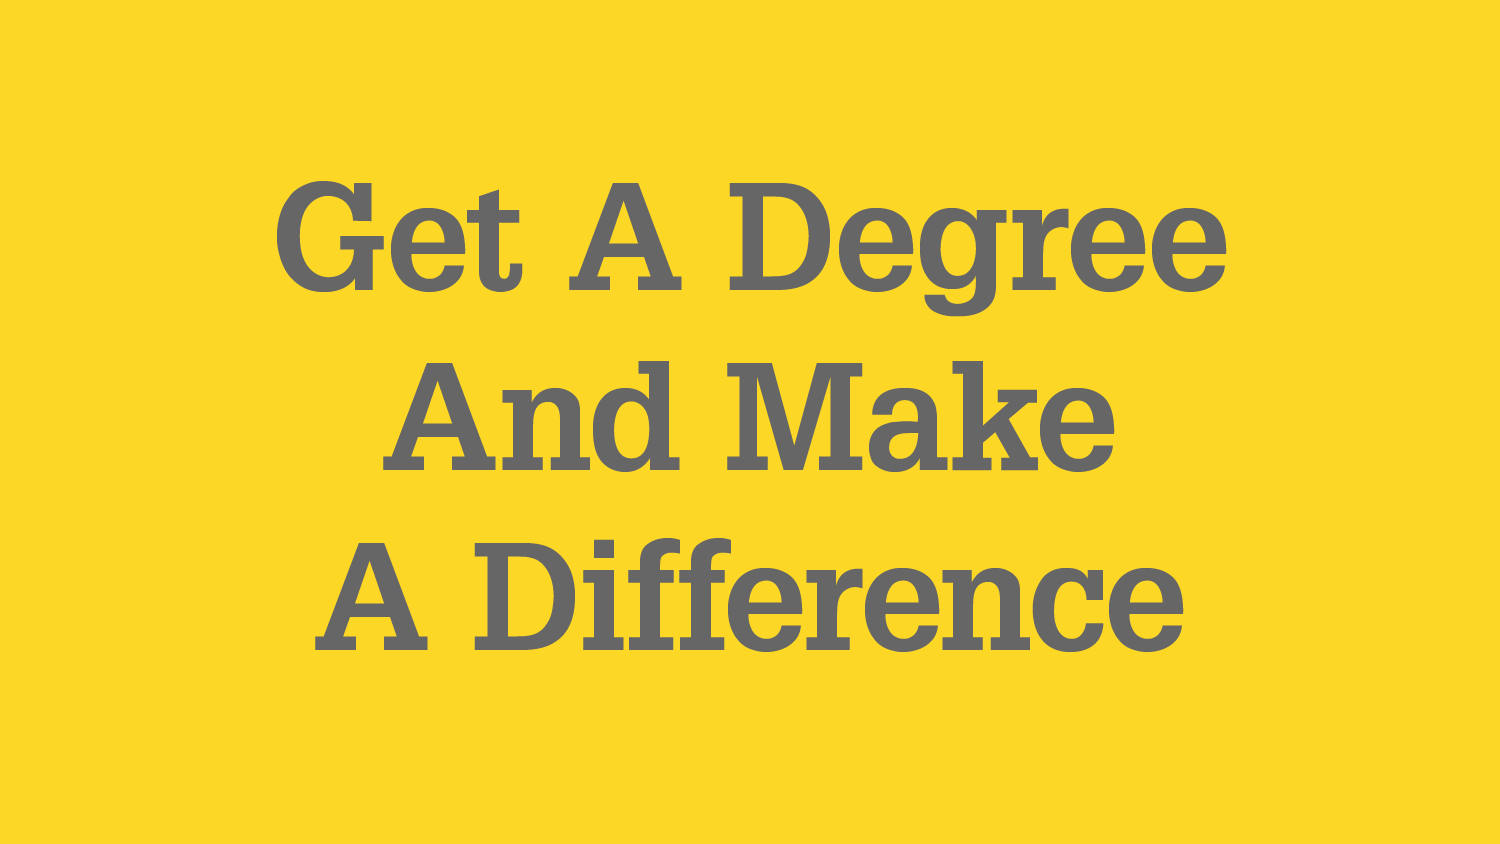 Graphic with text "Get a degree and make a difference"